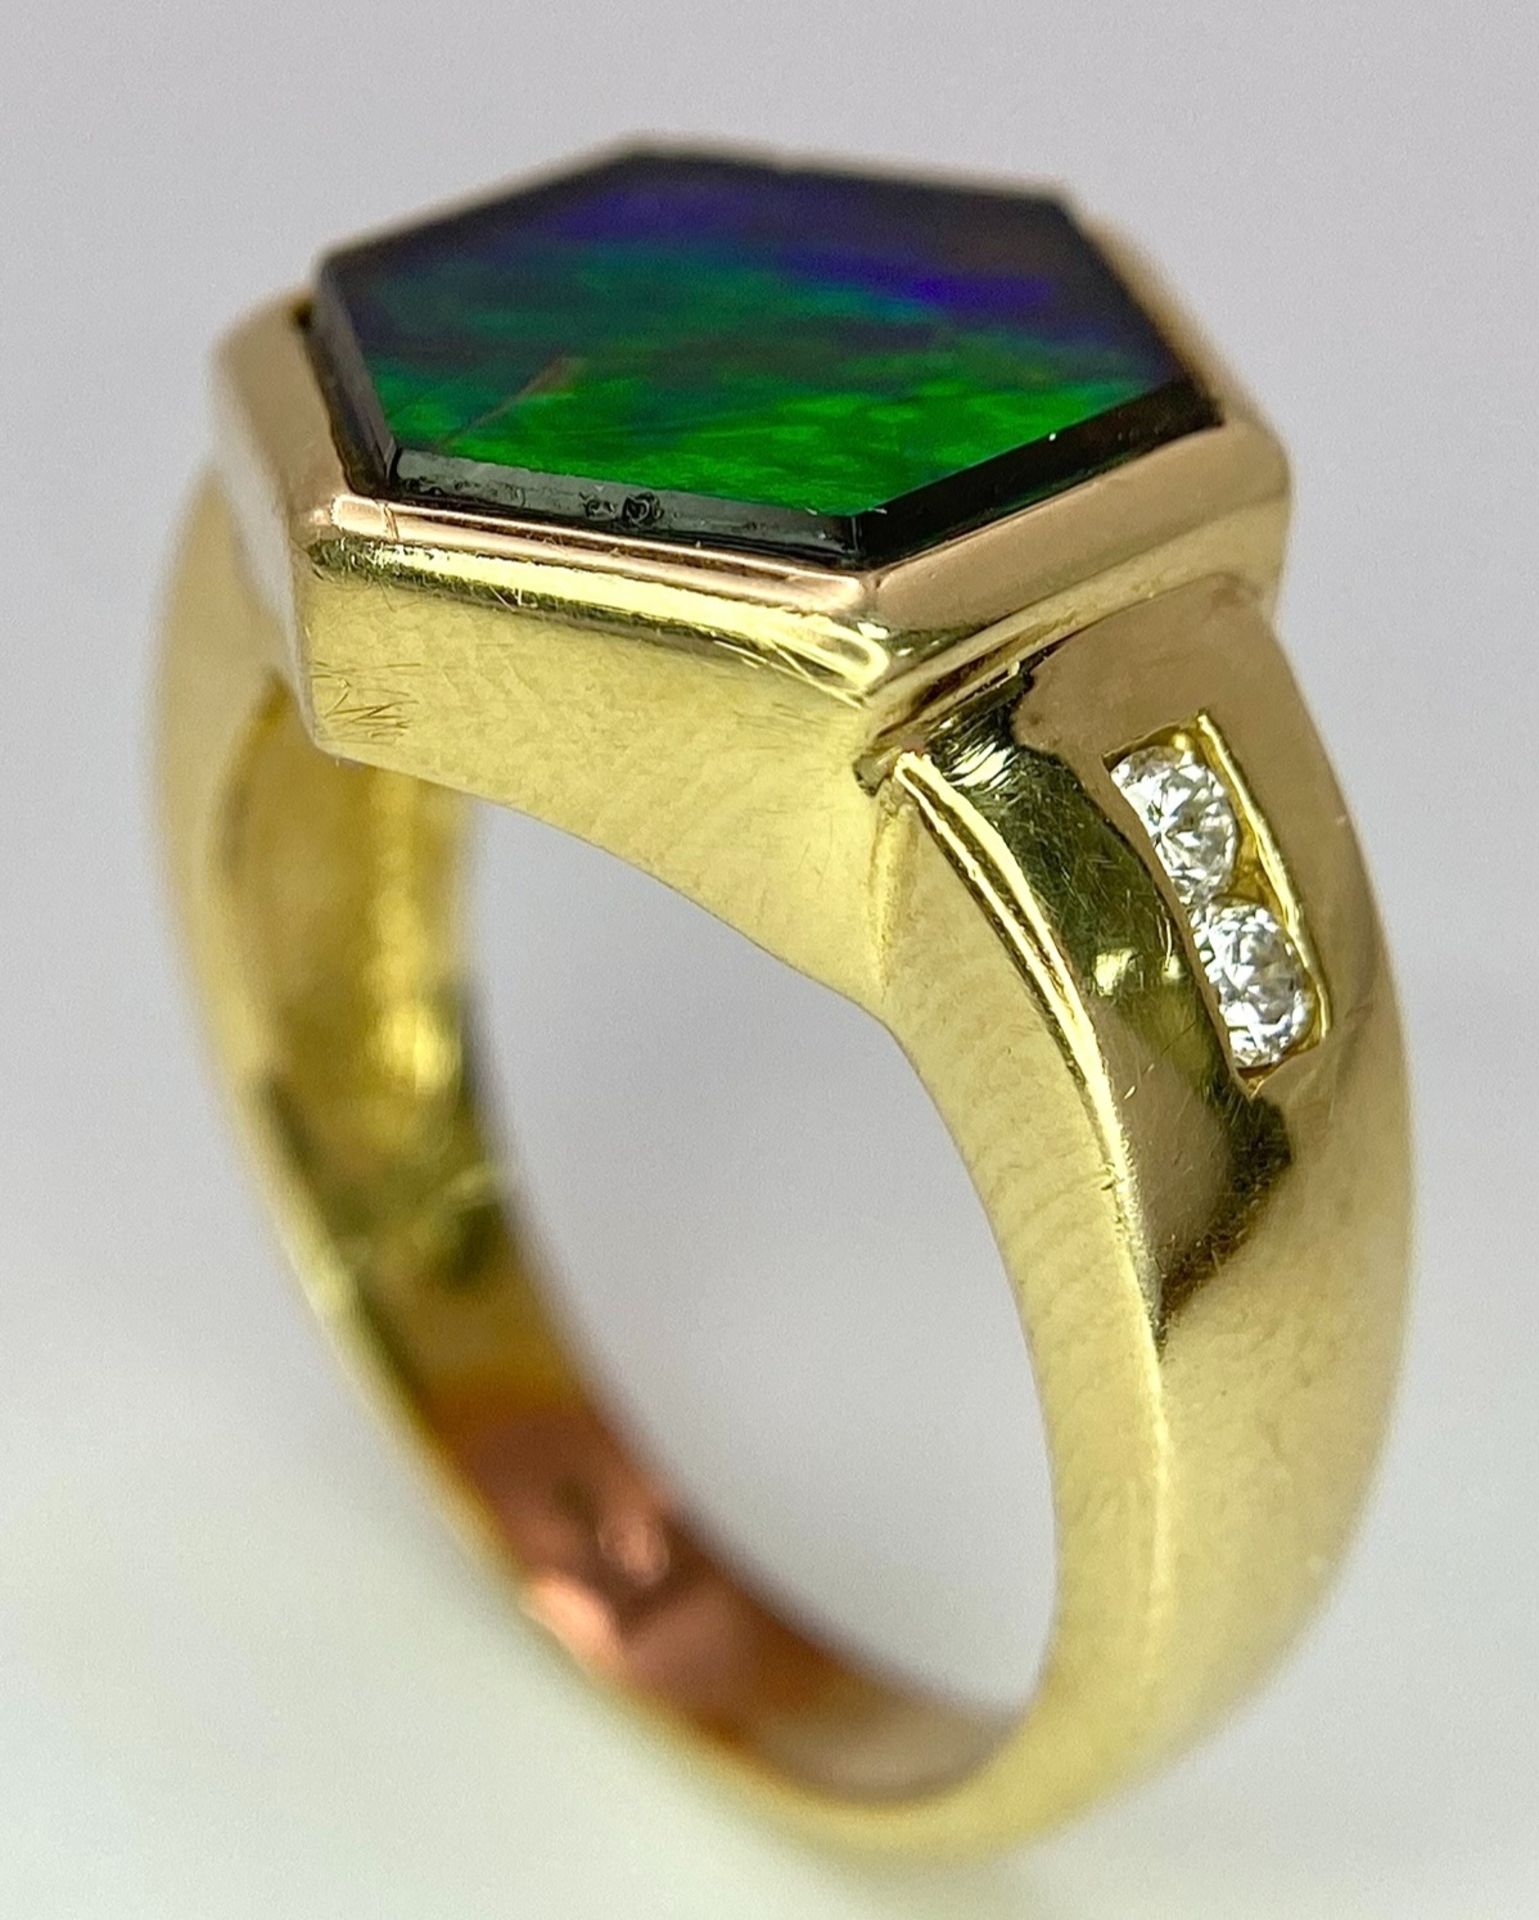 A Very Different, 14K Gold, Ammolite and Diamond Ring. Hexagonal shape. Size L. 6.3g total weight. - Image 7 of 9